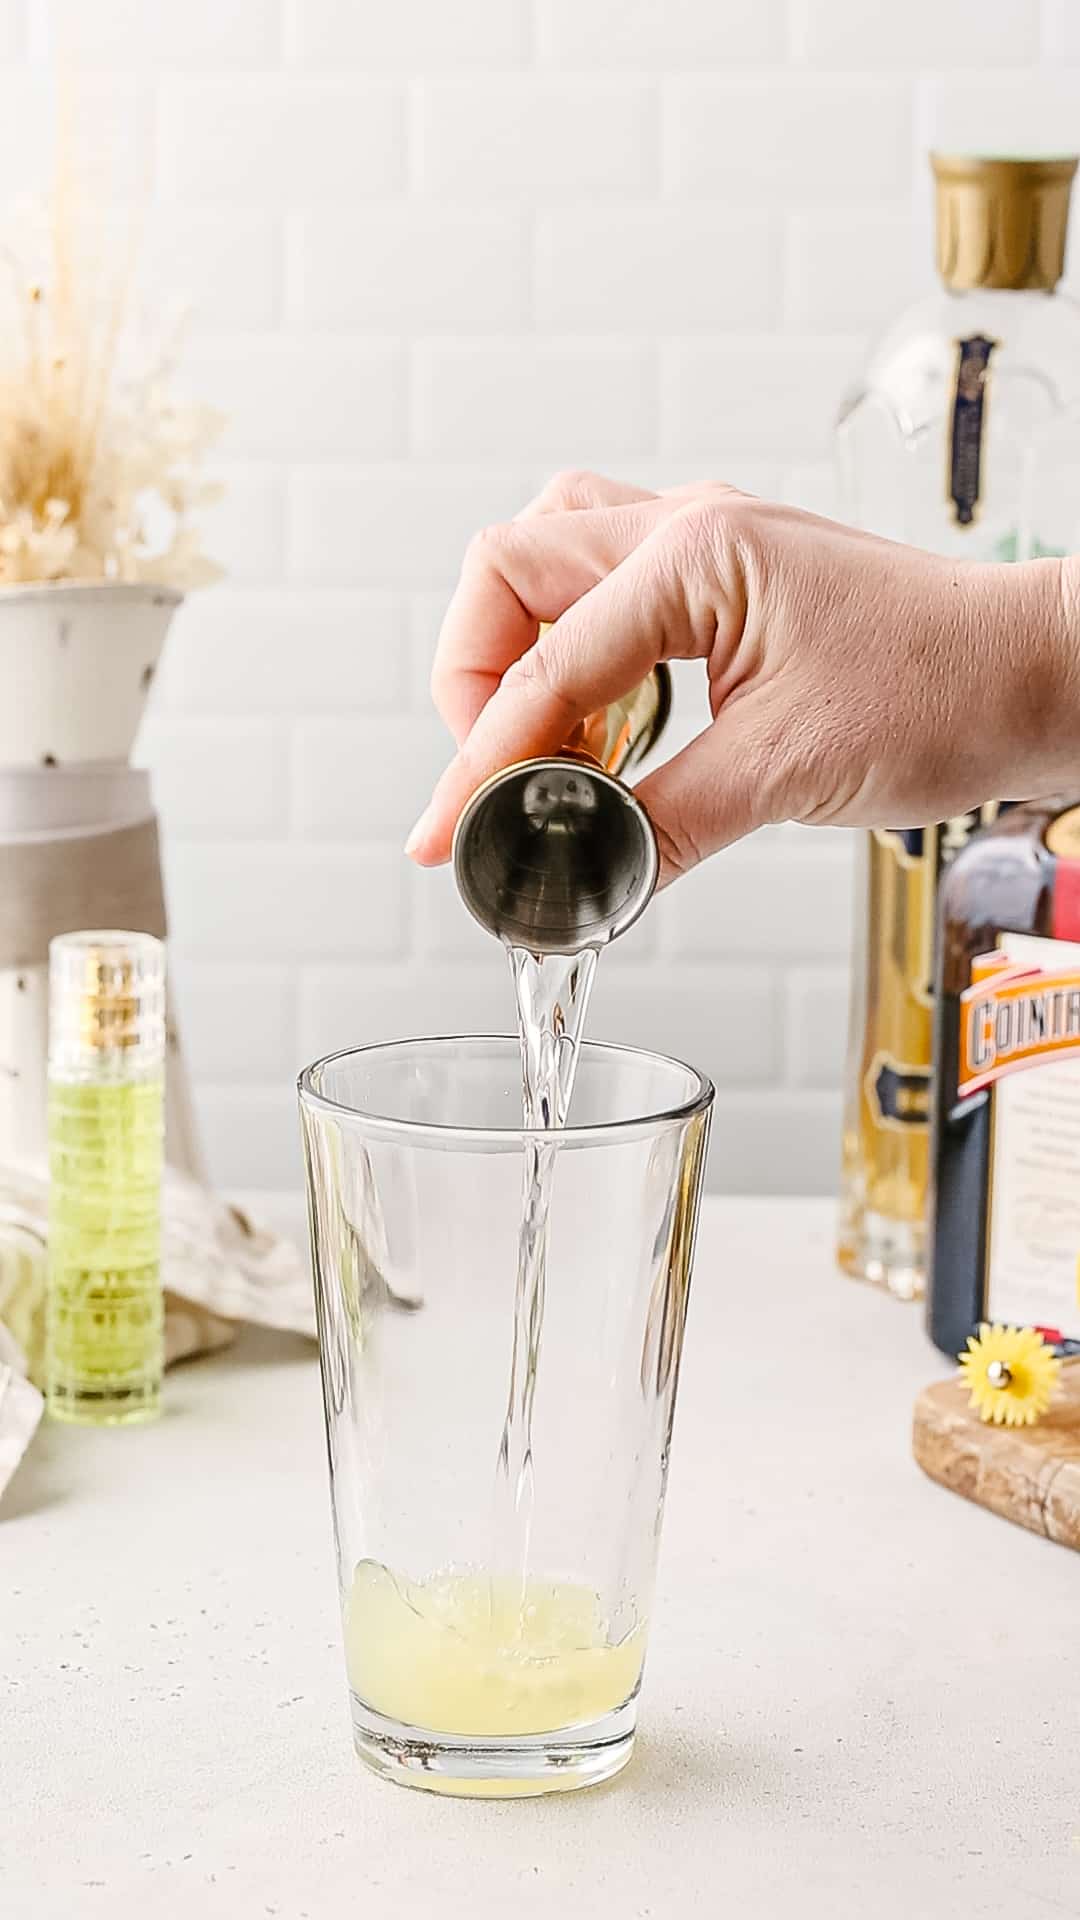 Hand pouring Cointreau liqueur from a jigger into a cocktail shaker.